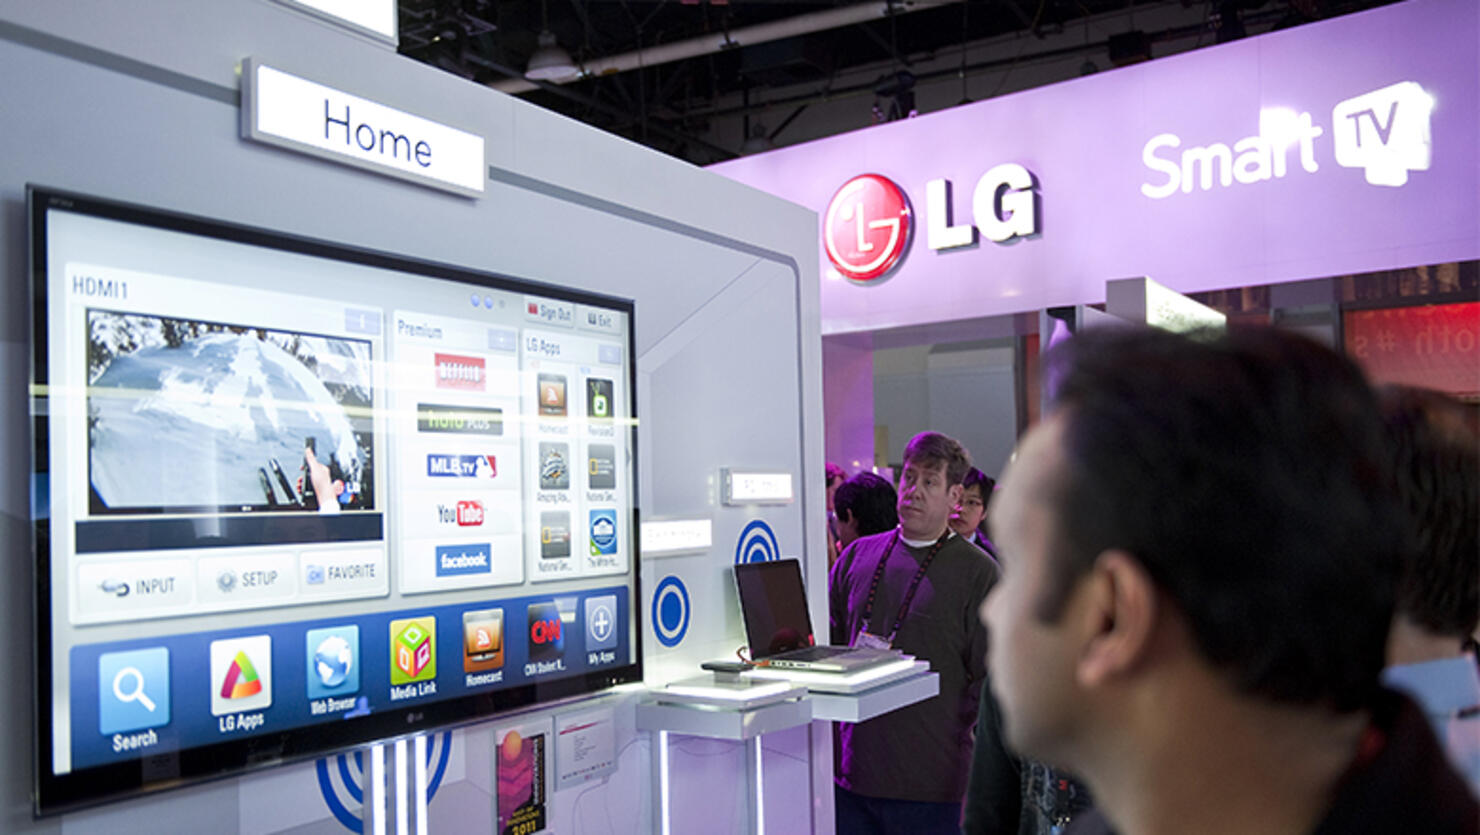 Consumer Electronics Show (CES) Showcases Latest Technology Innovations